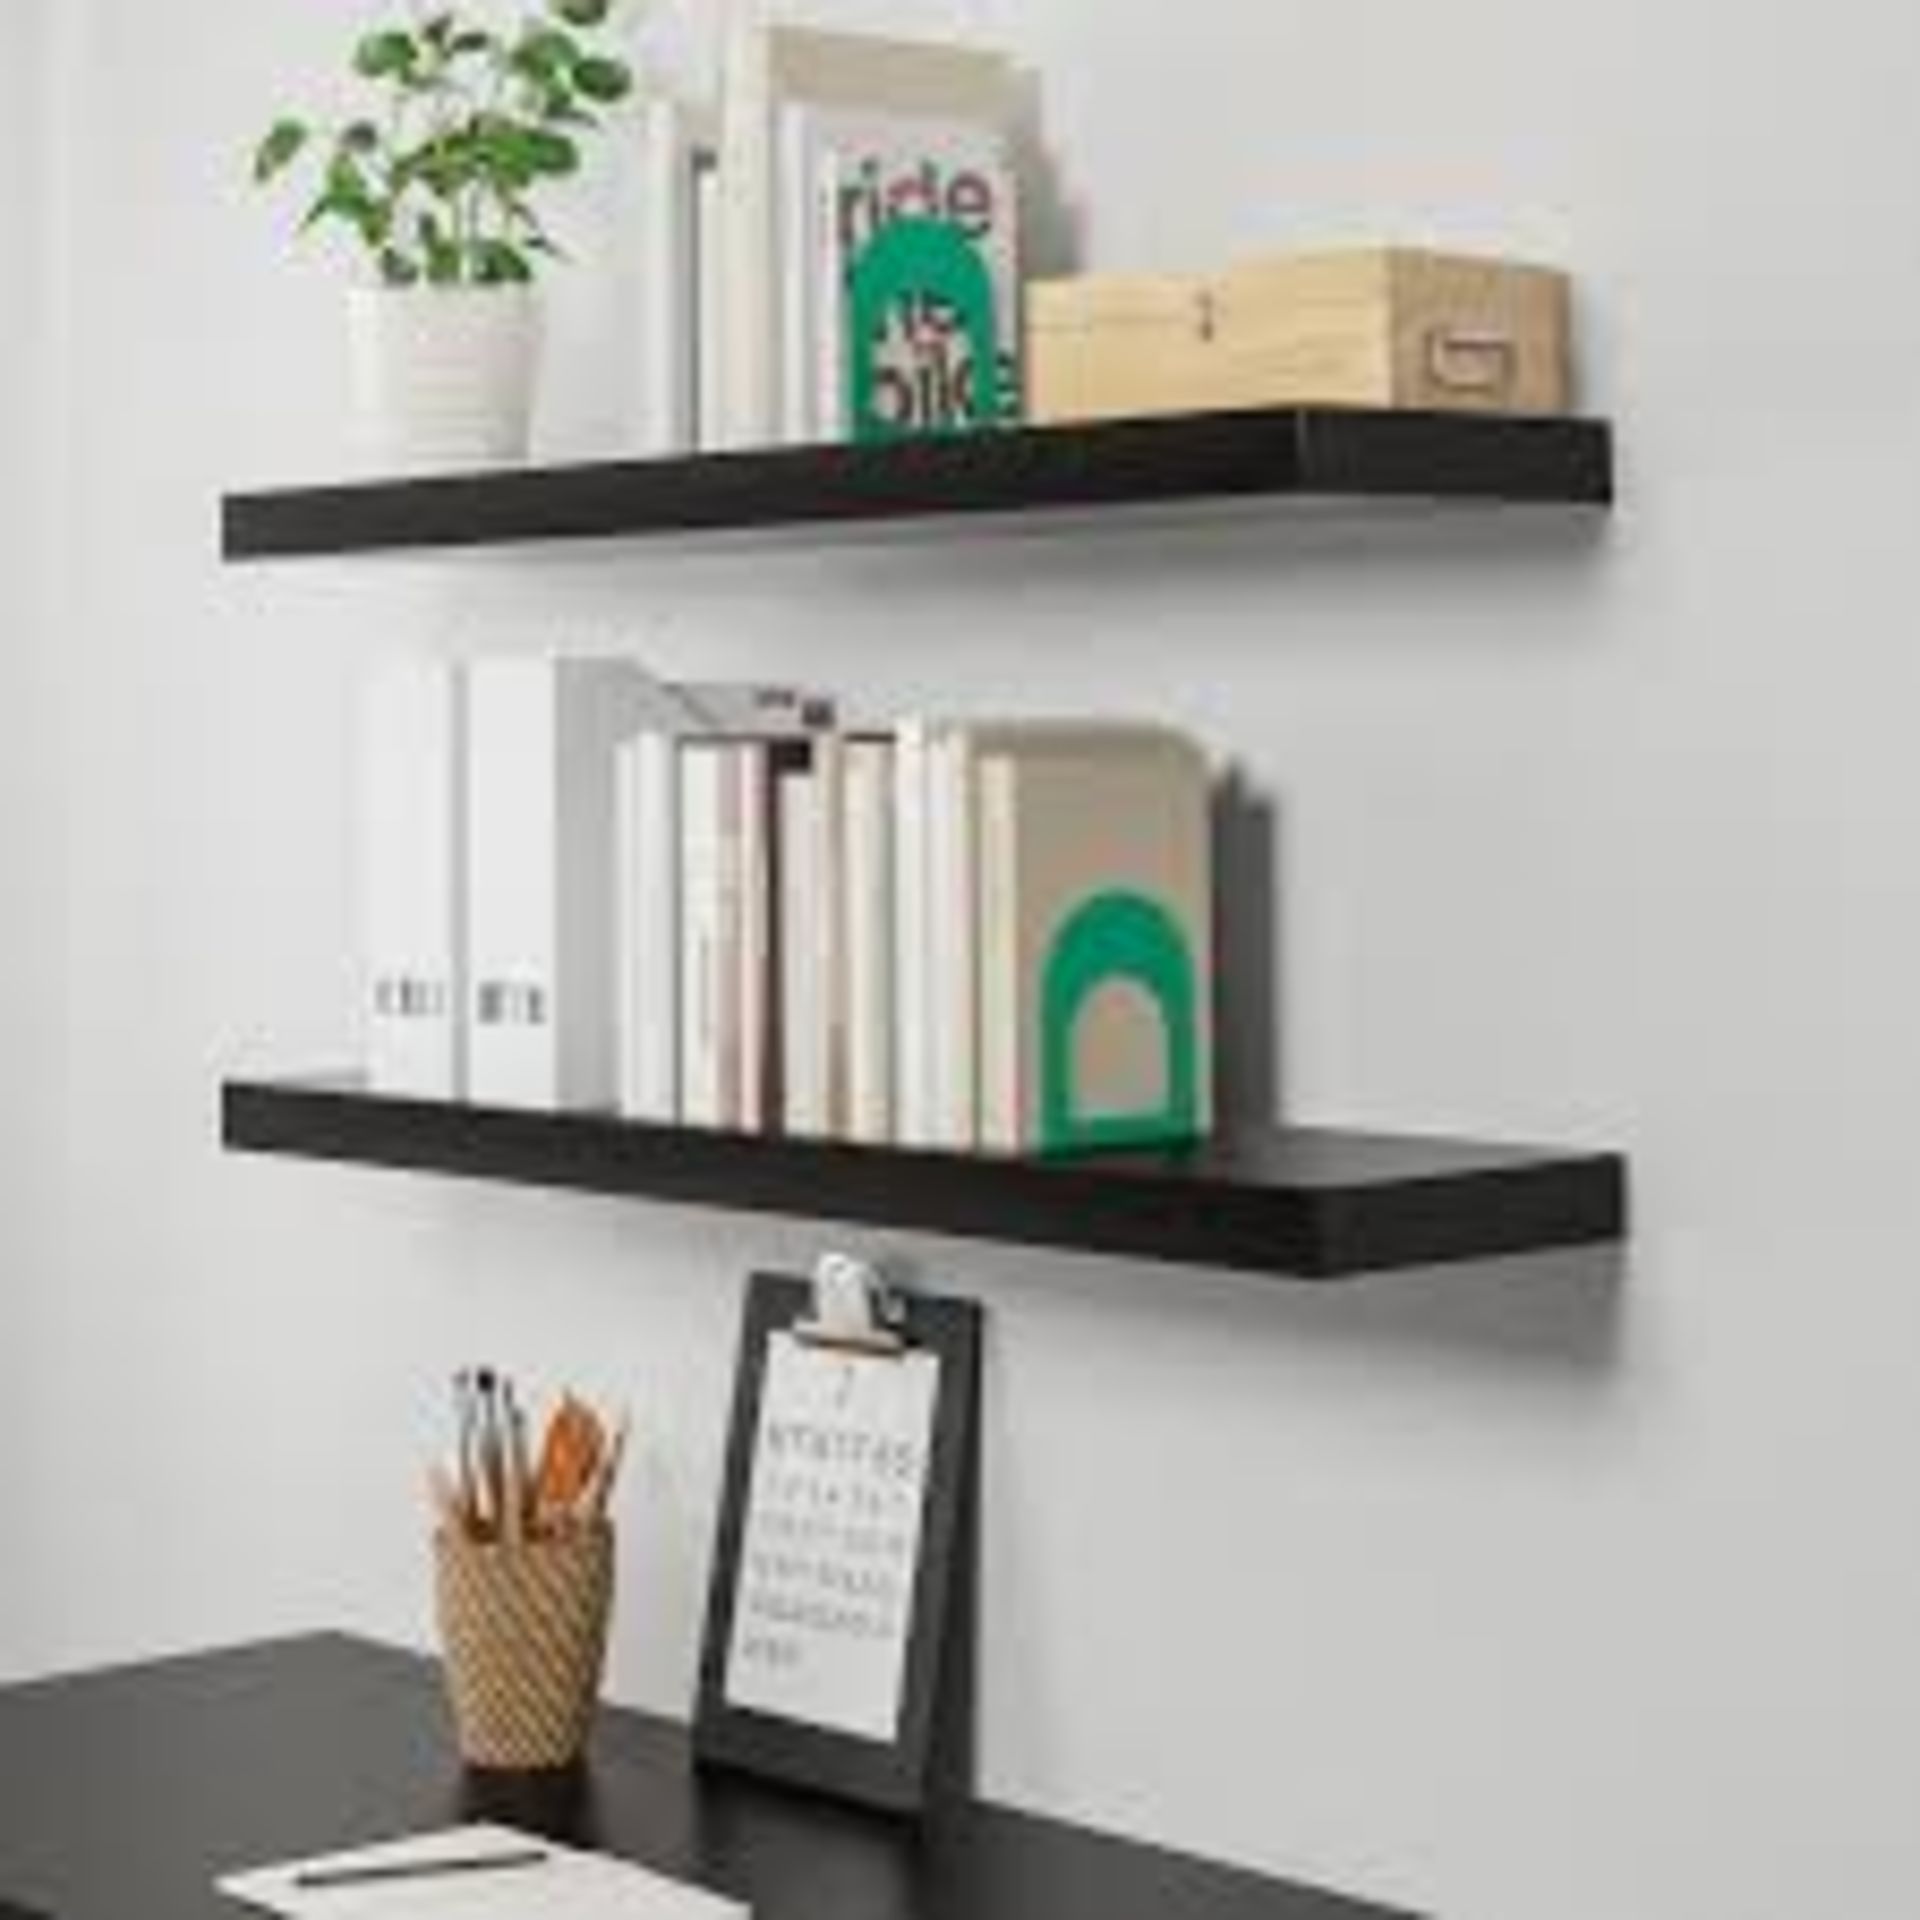 Lot to Contain 3 Boxed Urban Living Floating Shelves in Black Combined RRP £75 (Appraisals Are